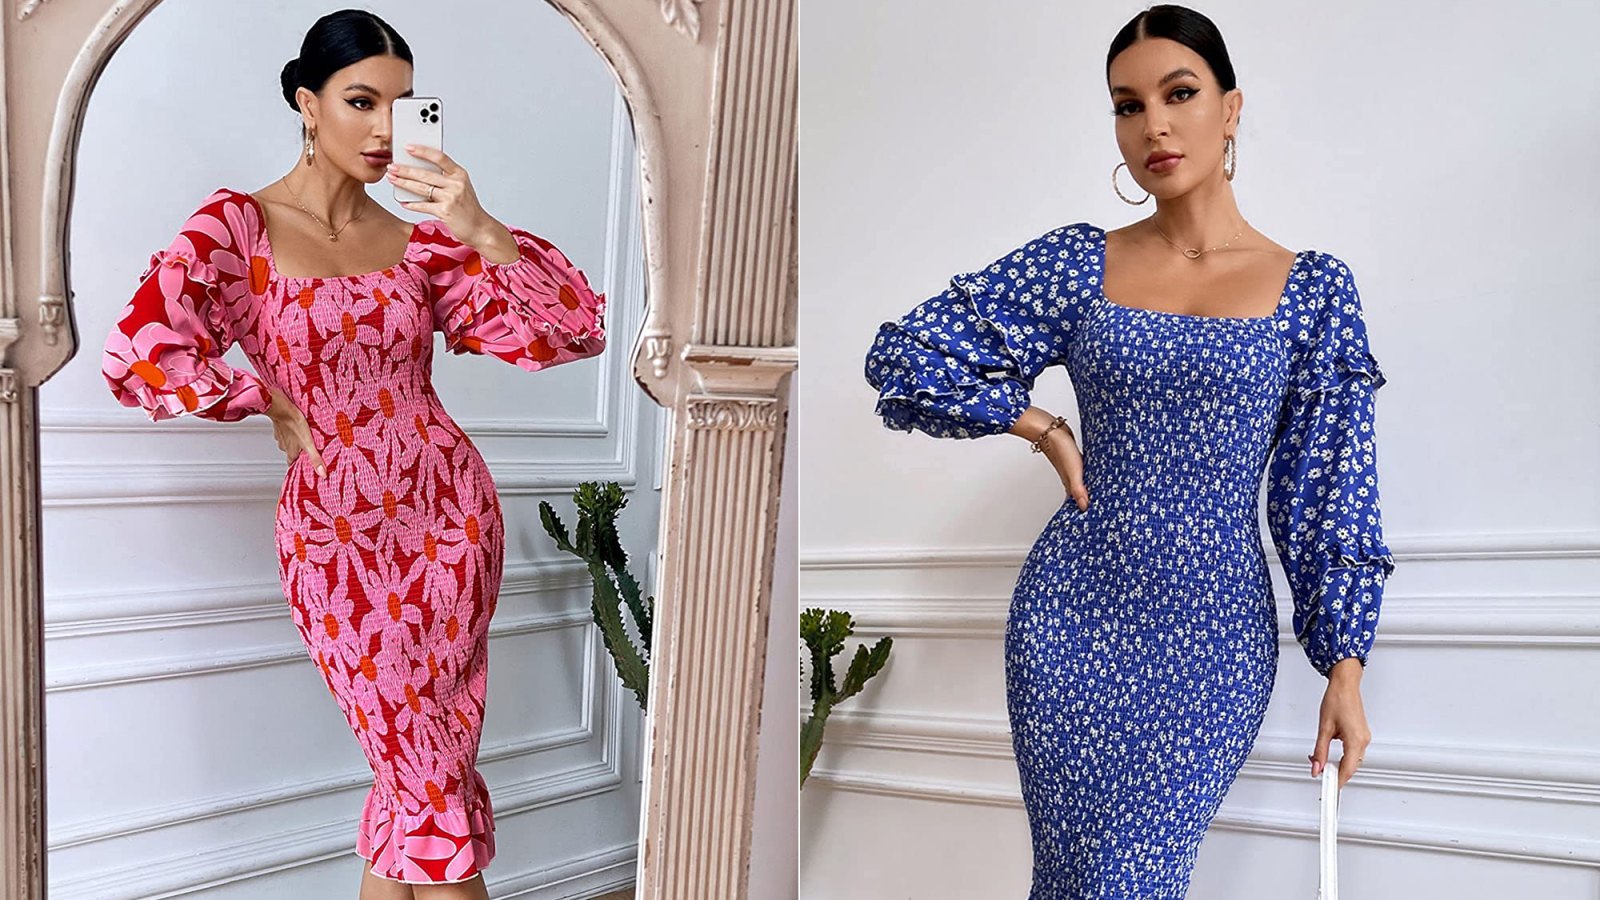 Reviewers Say That This Floral Bodycon Dress Is Seriously Figure Flattering